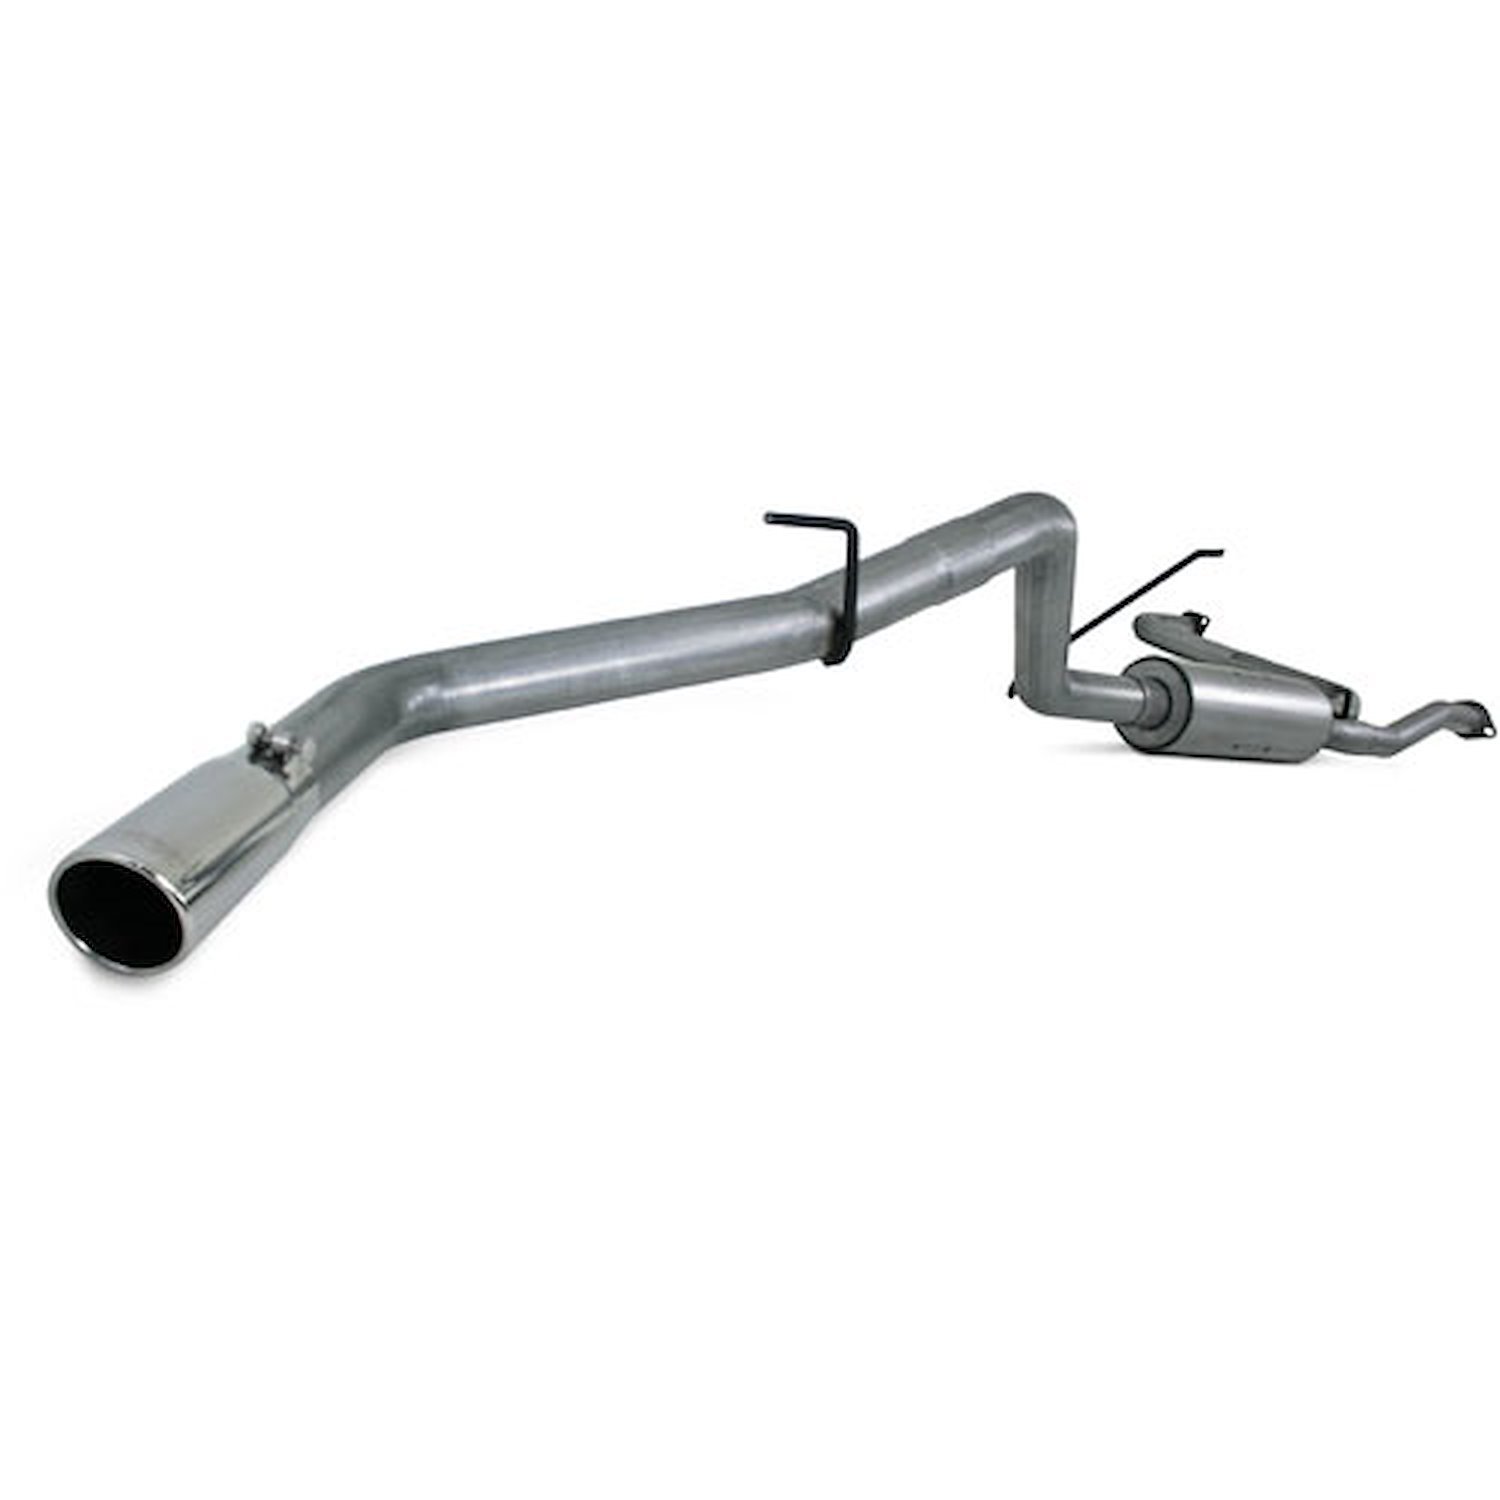 Installer Series Exhaust System 2005-2013 for Nissan Frontier 4.0L